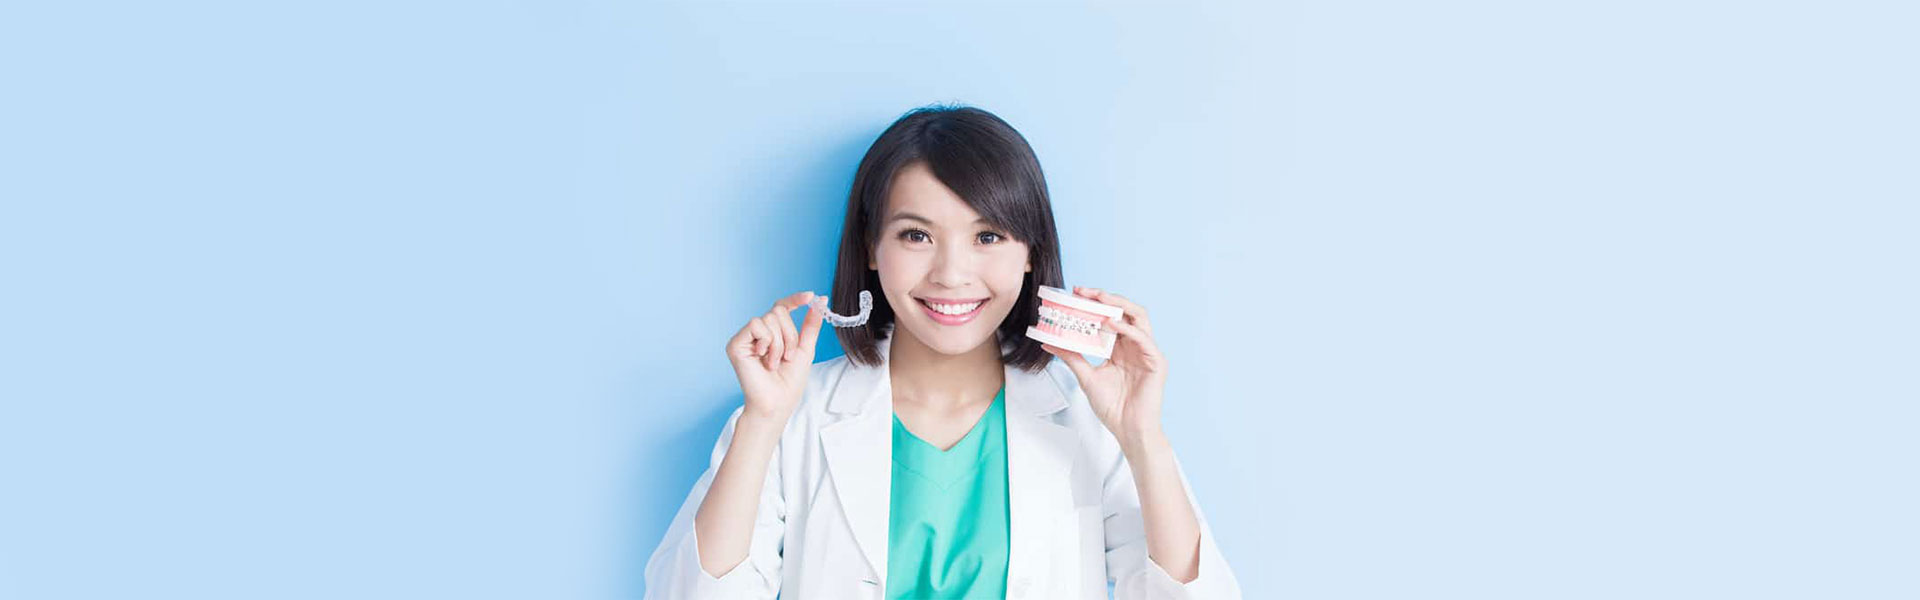 Invisalign vs. Braces: Making the Right Choice for Your Smile